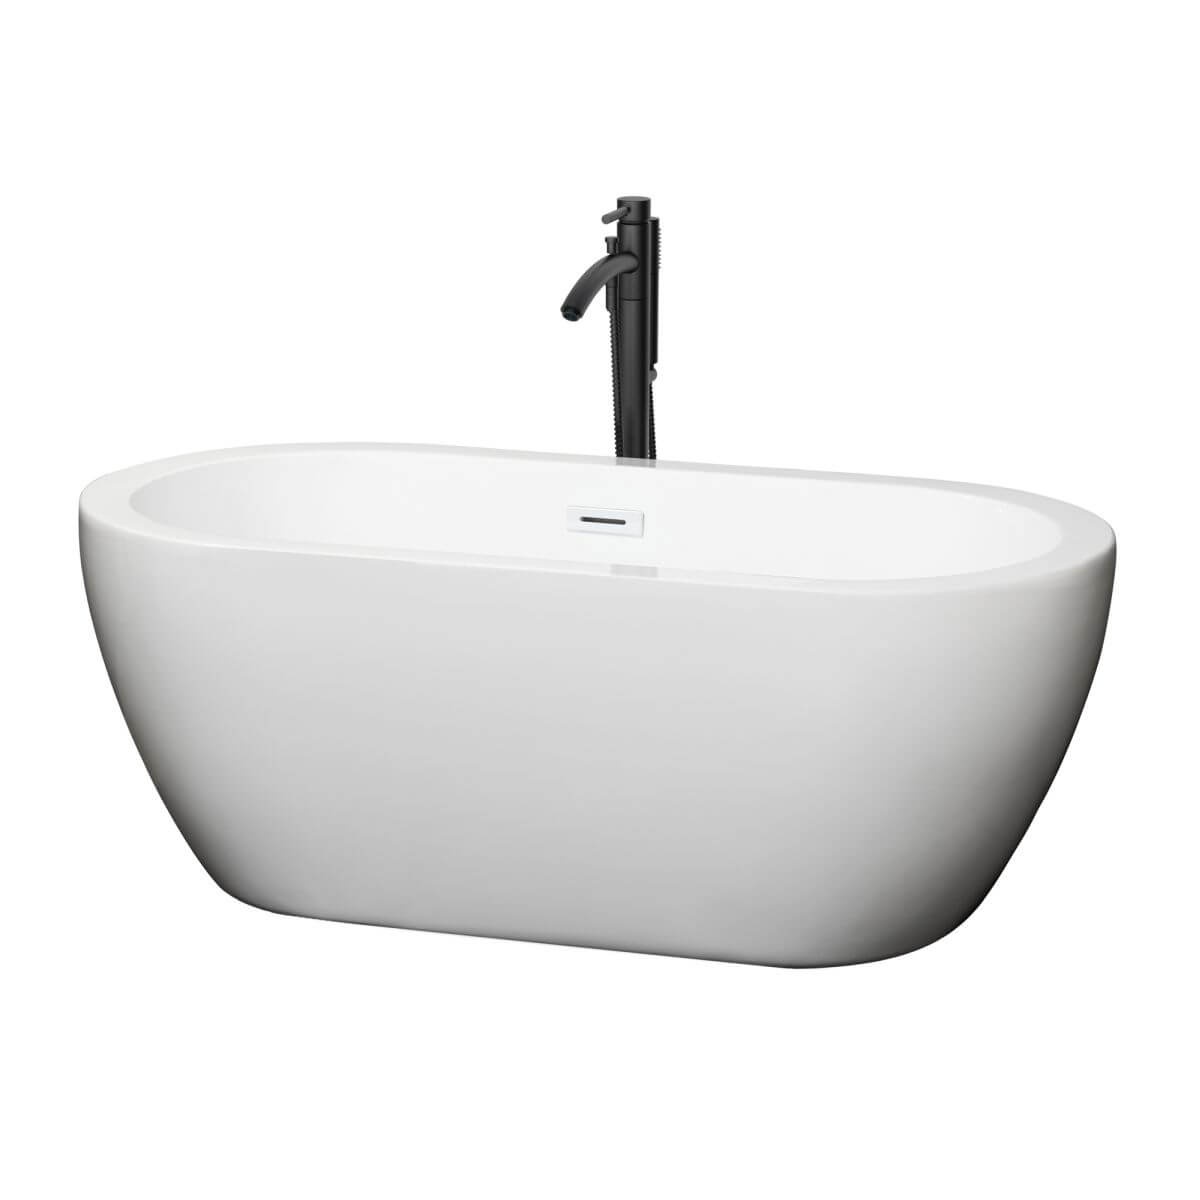 Wyndham Collection Soho 60 inch Freestanding Bathtub in White with Shiny White Trim and Floor Mounted Faucet in Matte Black - WCOBT100260SWATPBK